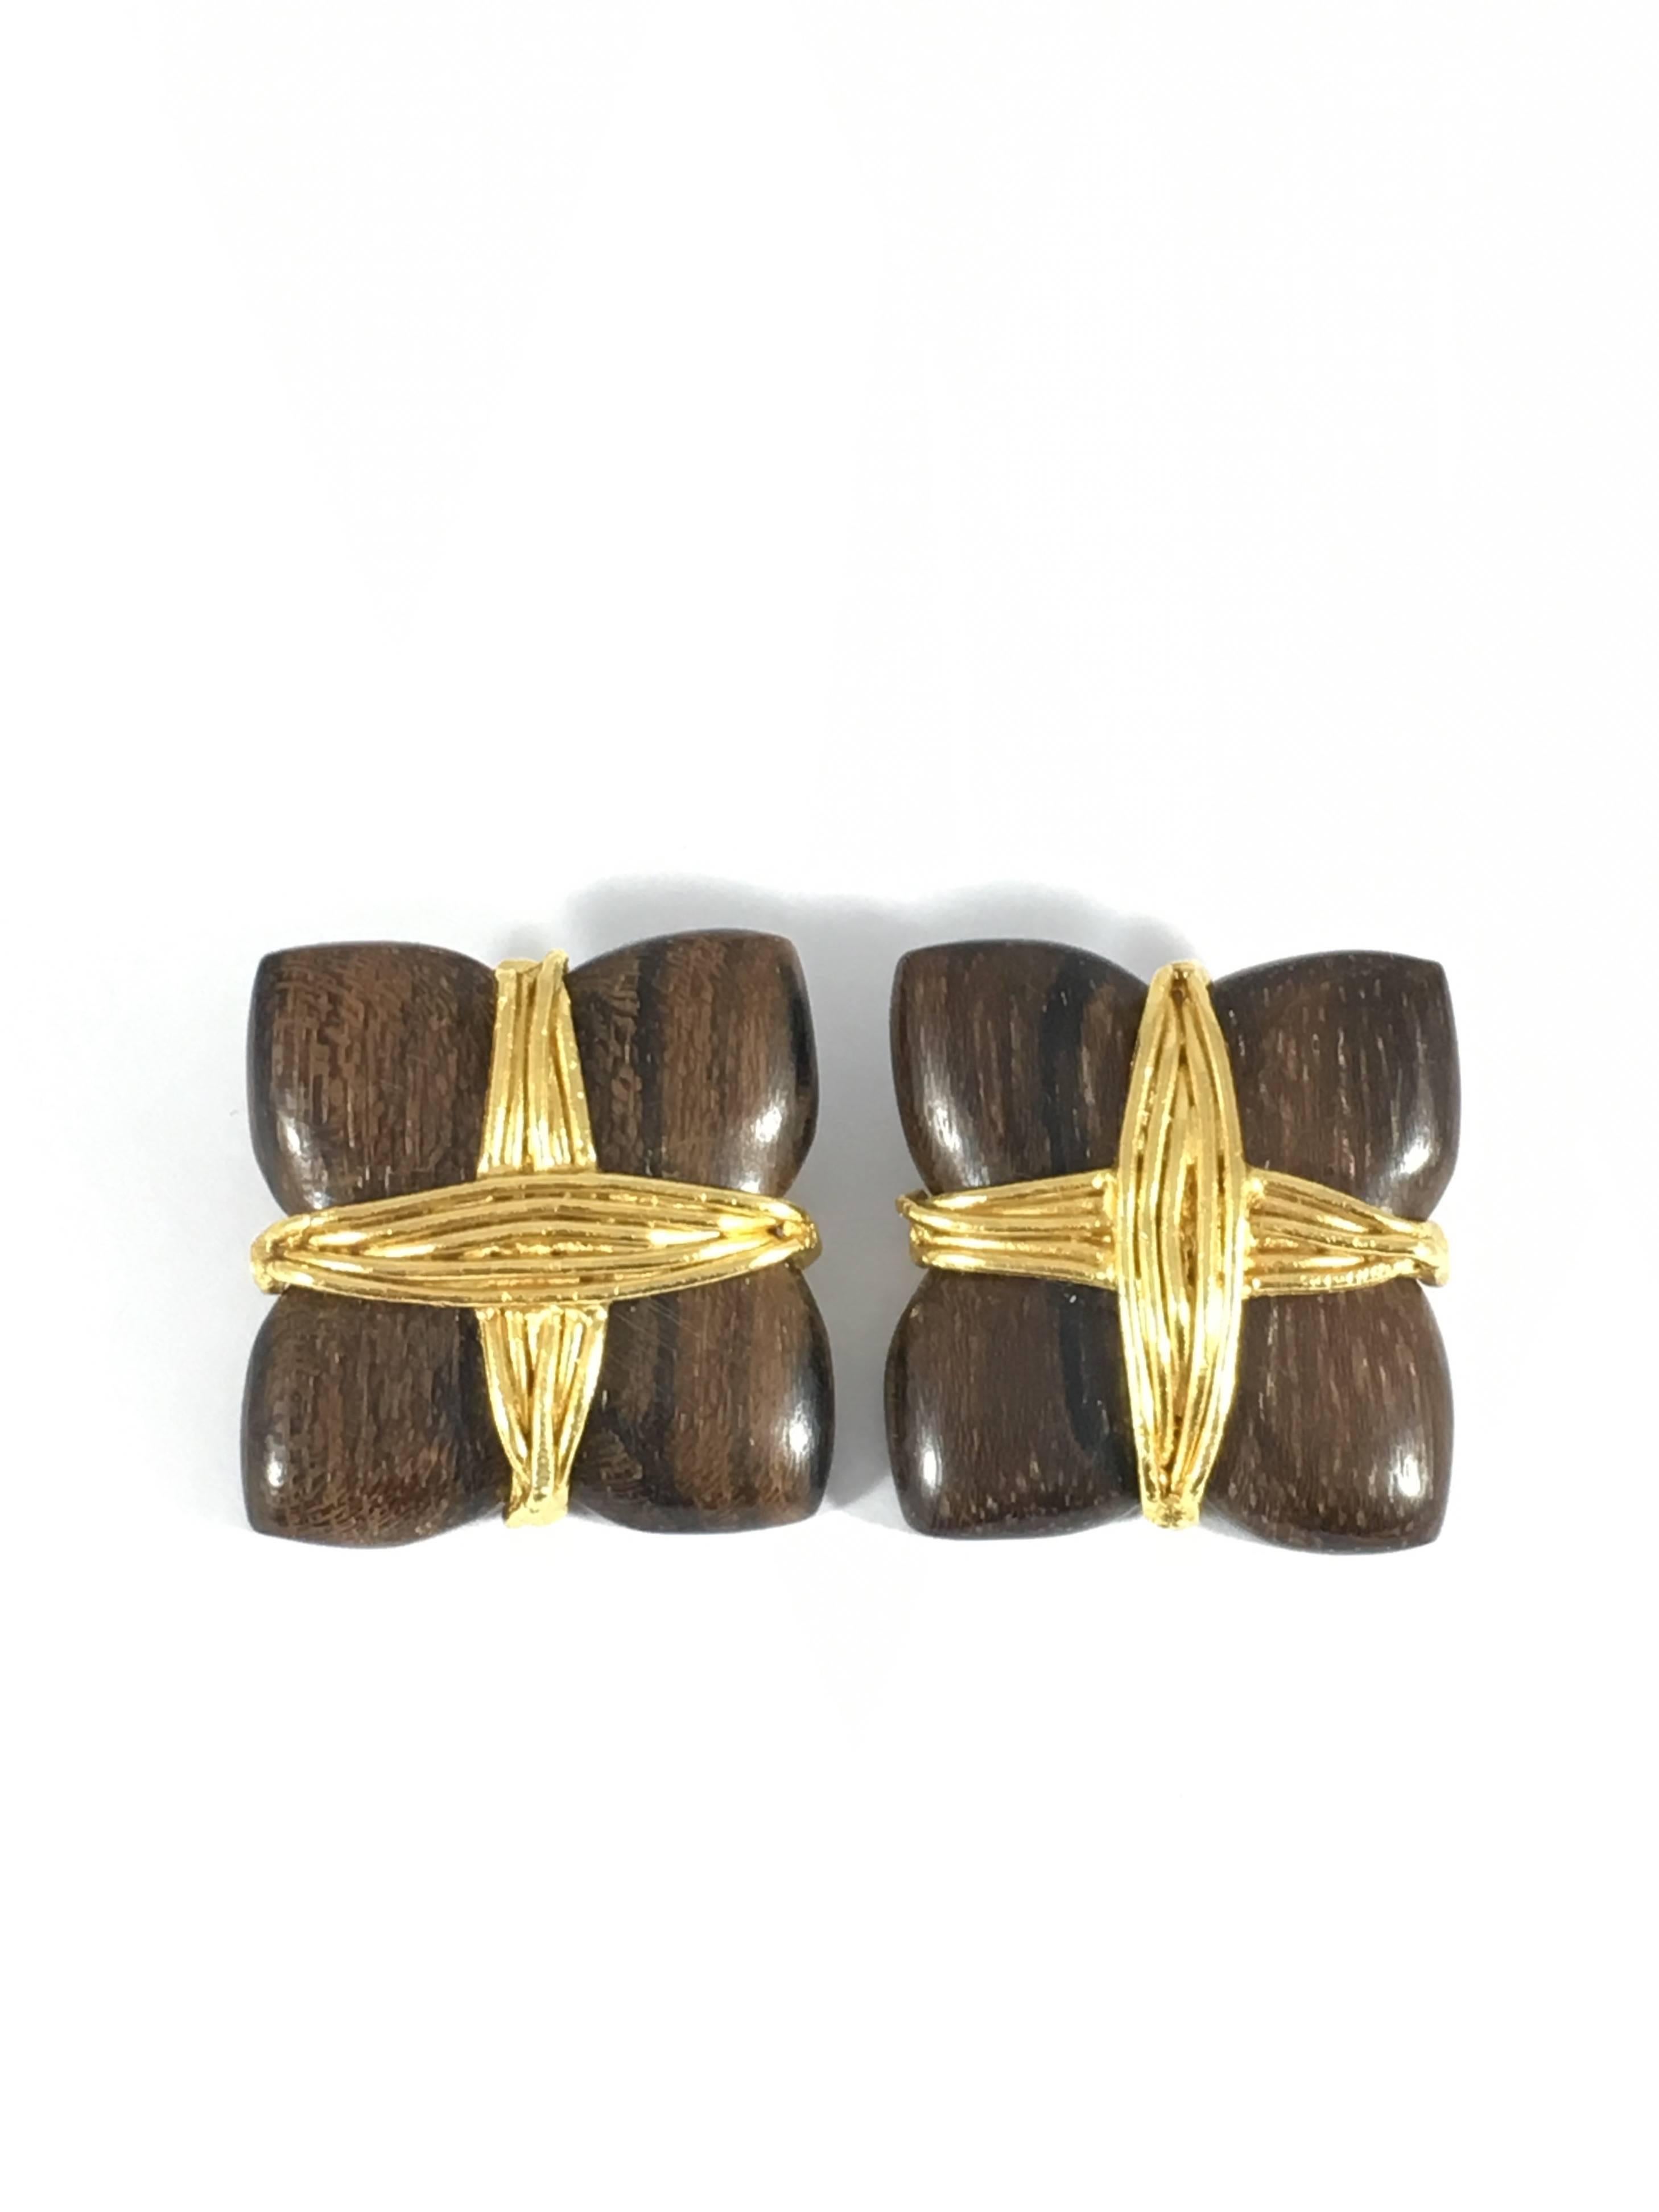 These are wooden Yves Saint Laurent Rive Gauche clip-on earrings from the 1980s. Rive Gauche was Yves Saint Laurent's high end line and the jewelry made for it is beautifully crafted. The earrings measure 1 1/4 inches by 1 1/4 inches. They are